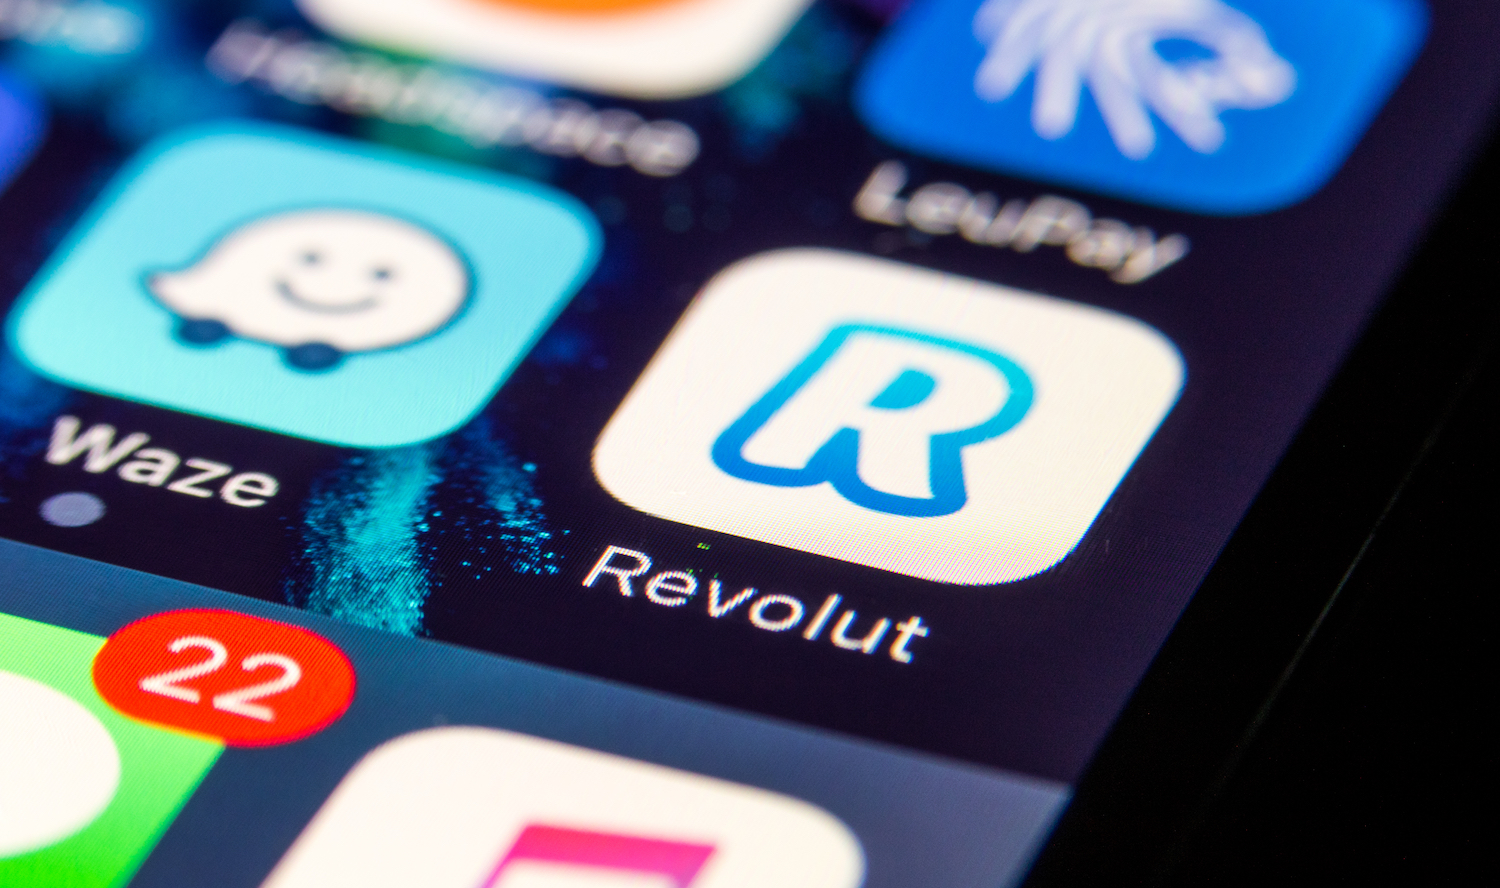 Digital Financial institution Revolut Provides Stellar to Listing of Supported Cryptocurrencies